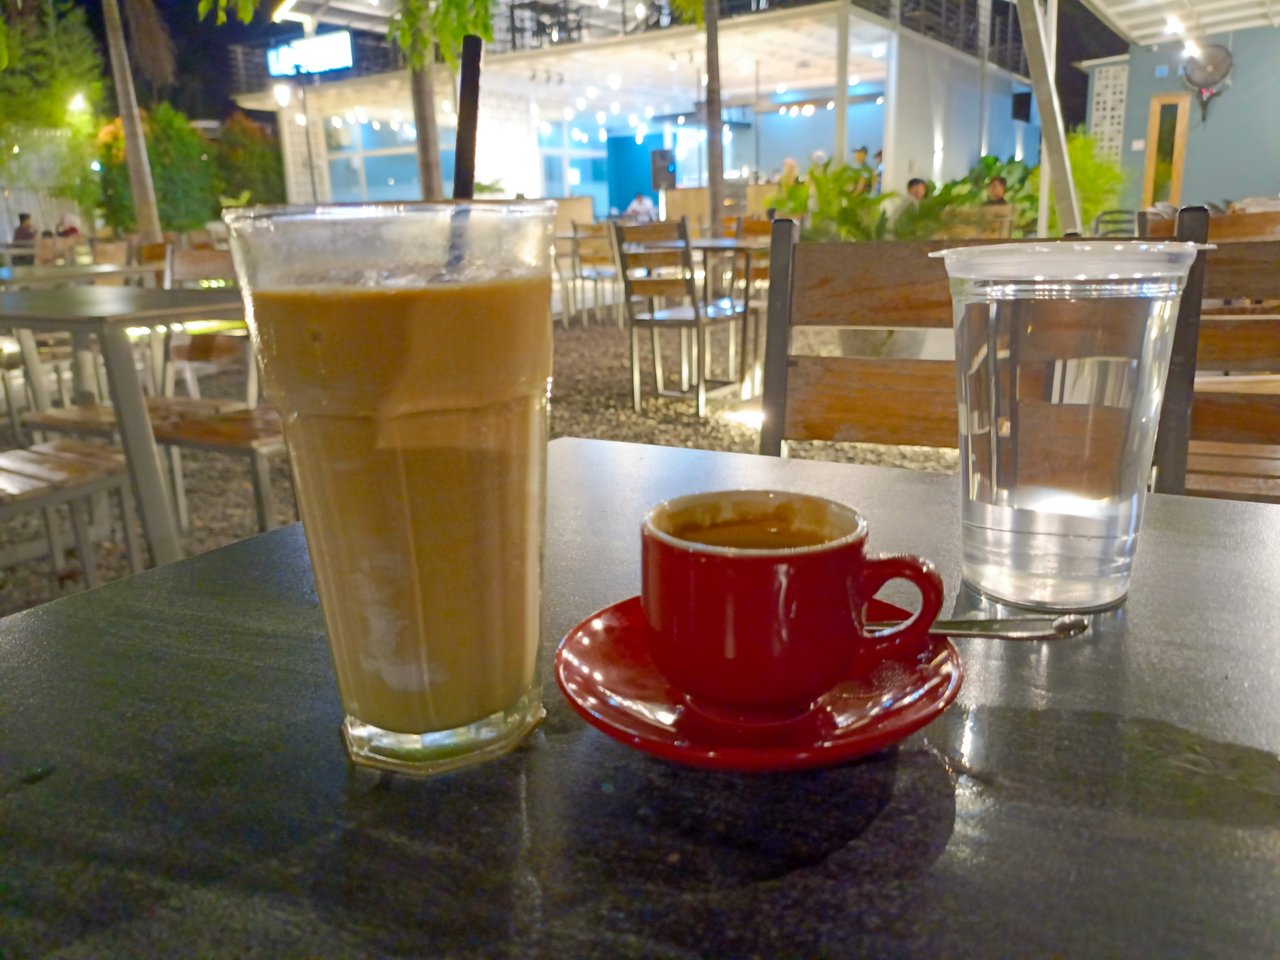 Enjoy coffee in the evening while traveling